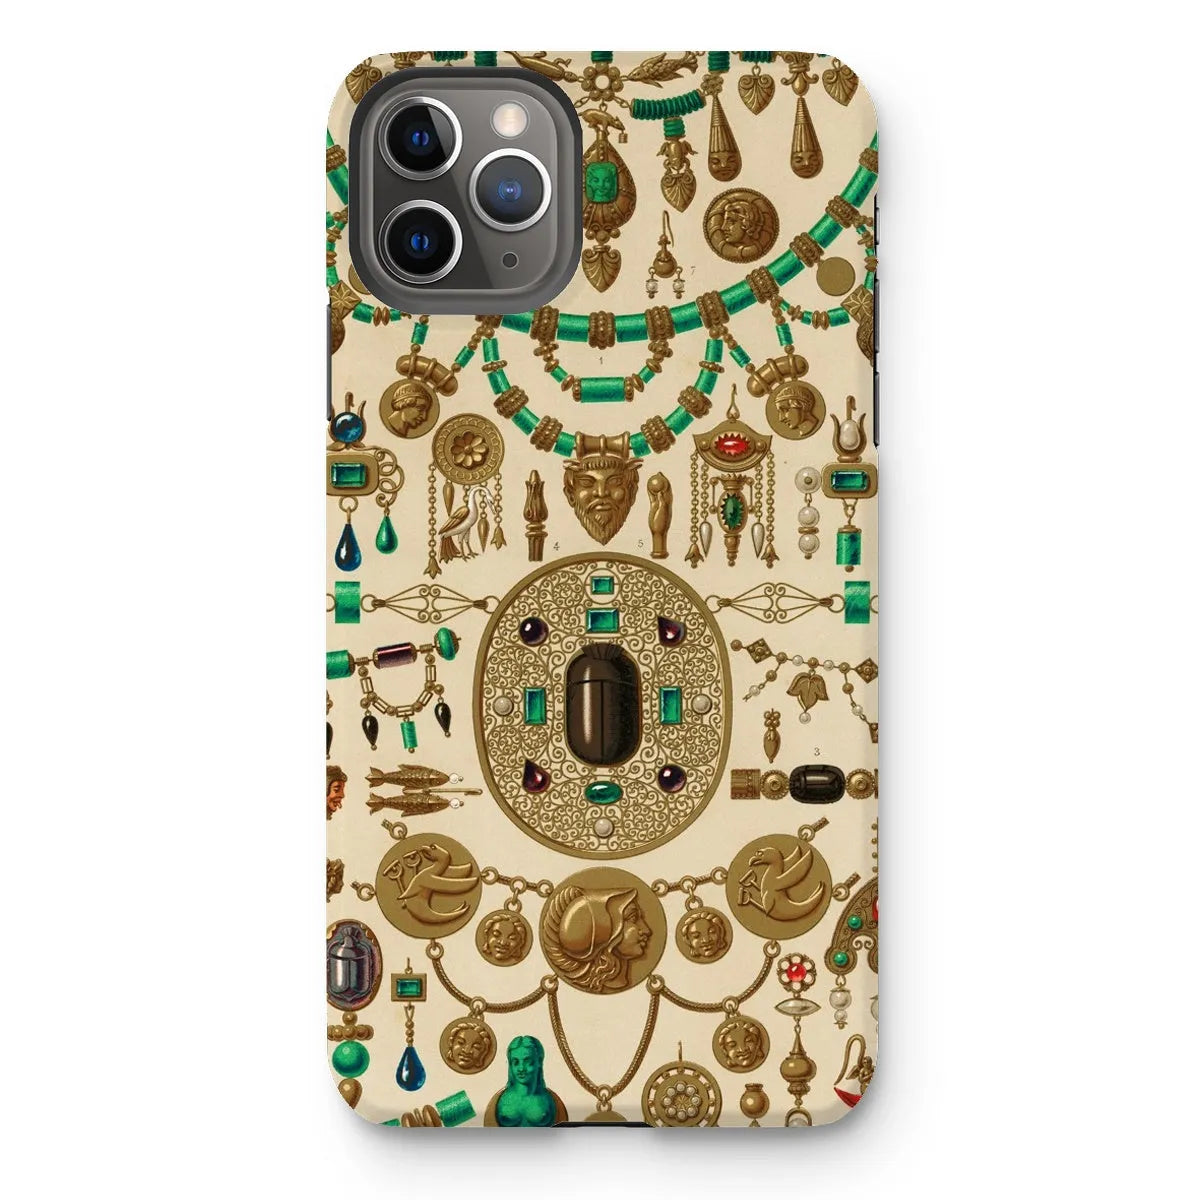 Etruscan Patterns From L’ornement Polychrome By Auguste Racinet Tough Phone Case - Iphone 11 Pro Max / Matte - Mobile